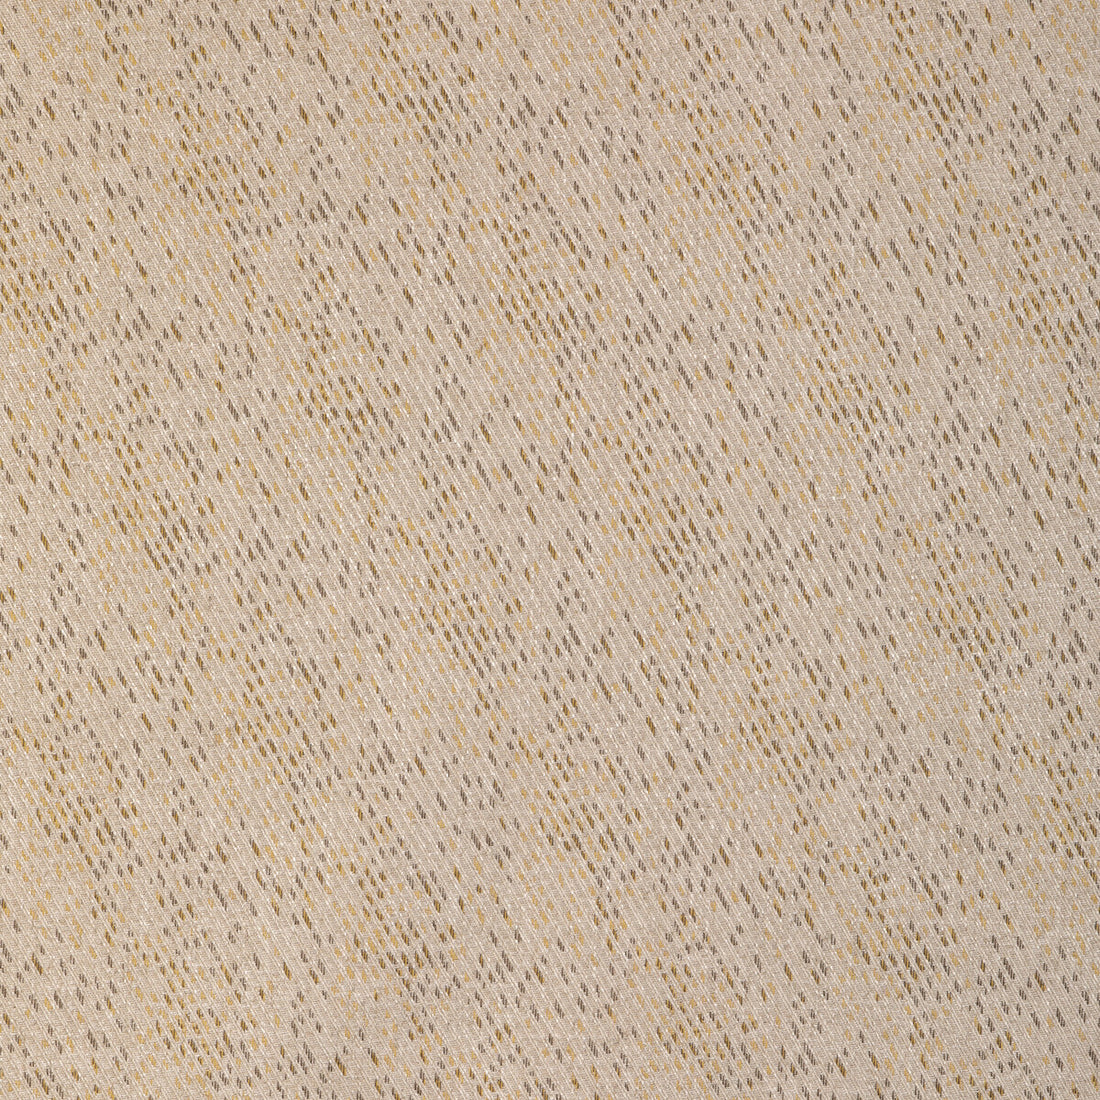 Hana fabric in almond color - pattern GWF-3800.1614.0 - by Lee Jofa Modern in the Kelly Wearstler VIII collection